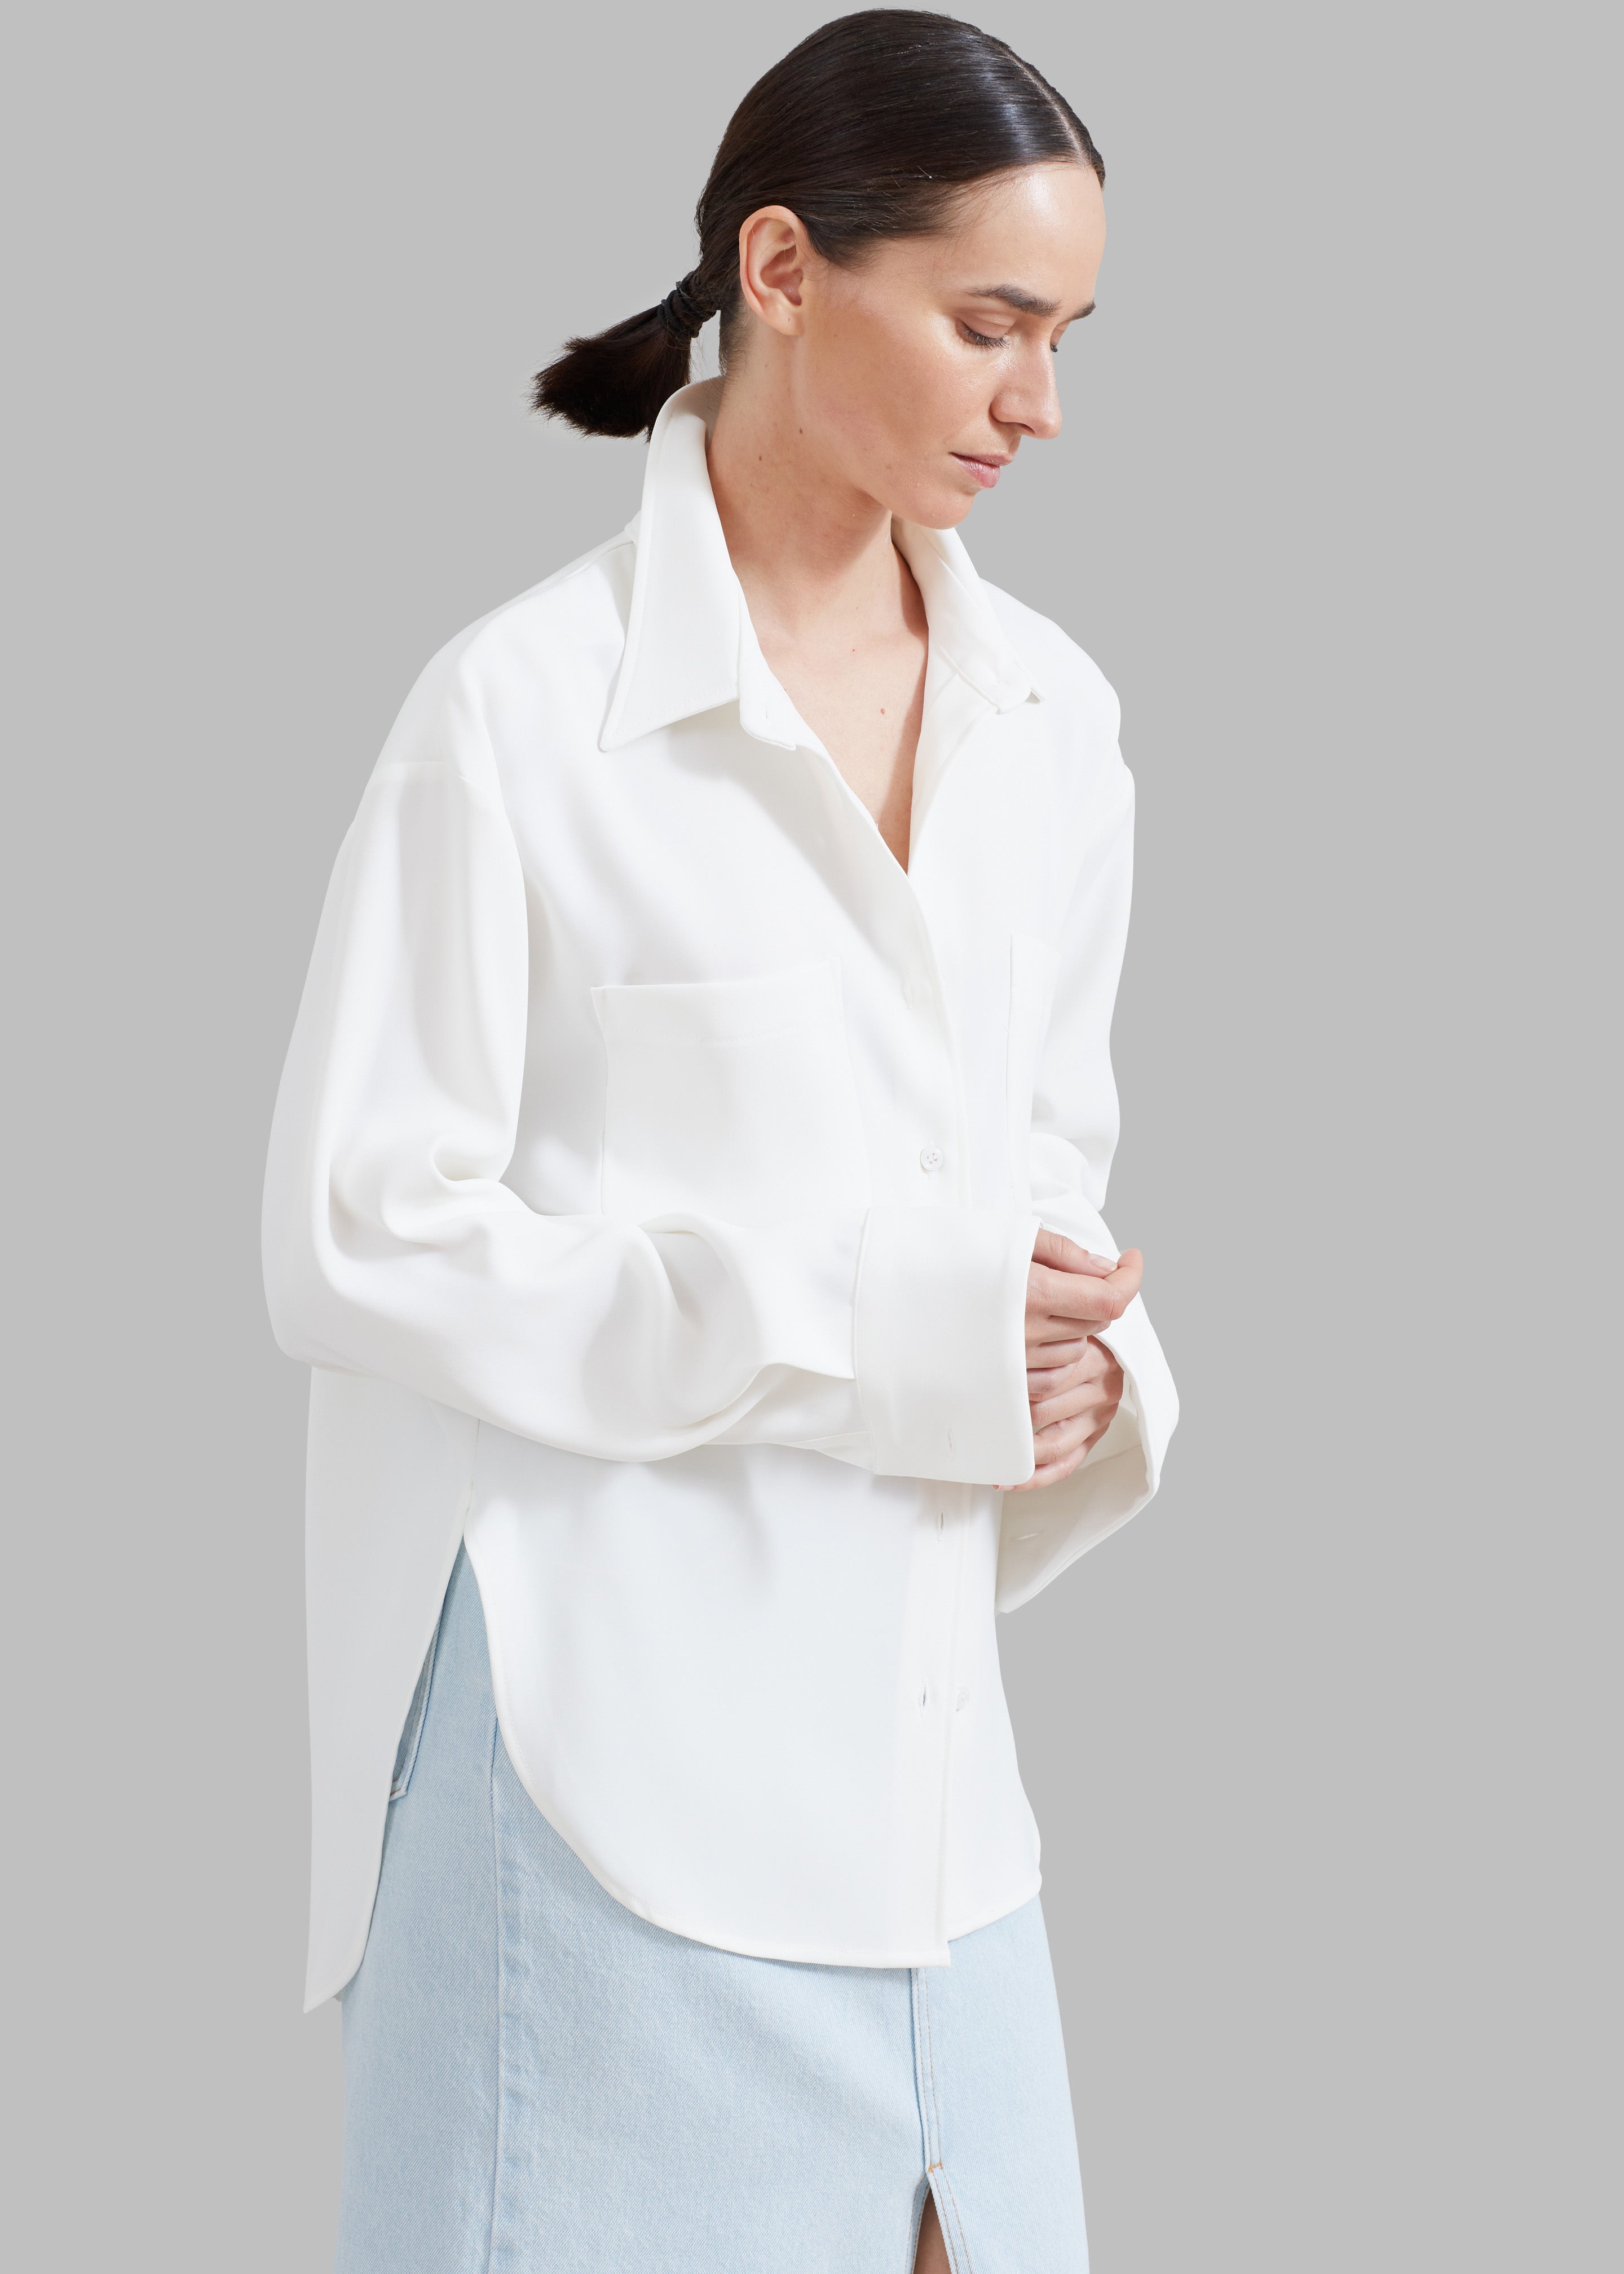 Women's Blouses & Shirts – Page 3 – The Frankie Shop